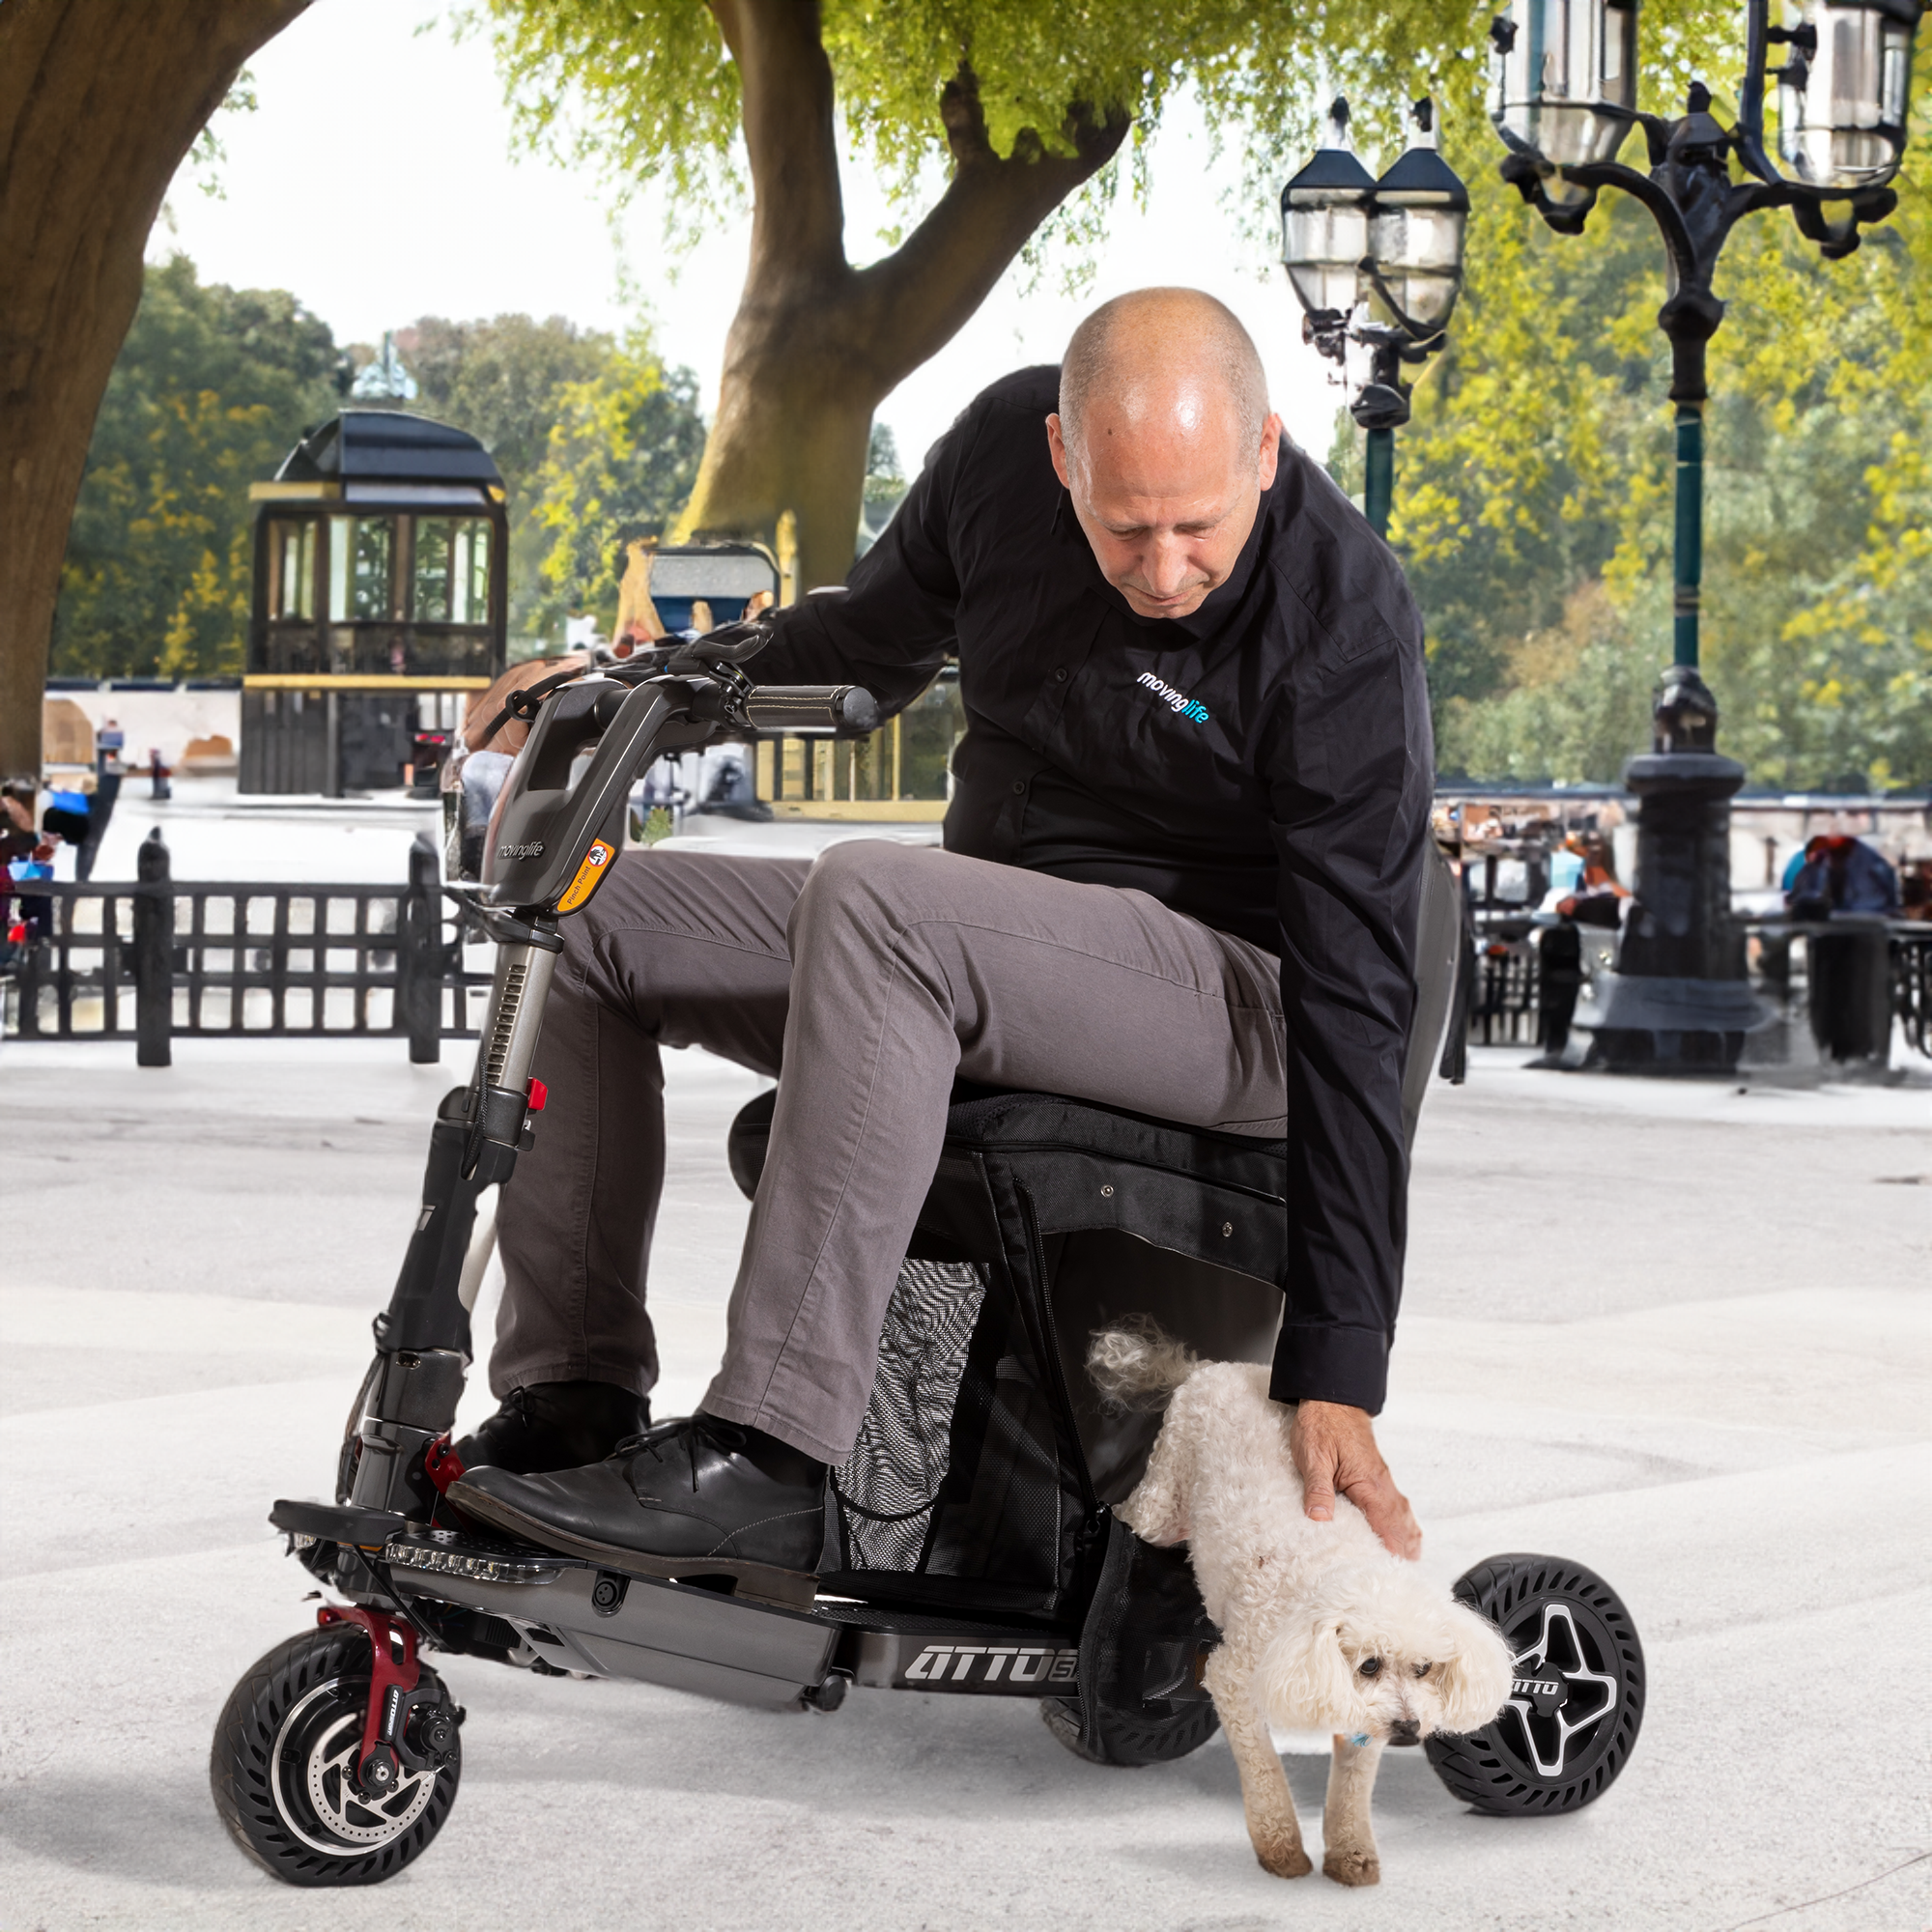 ATTO Folding Mobility Scooter by Movinglife: The Perfect Companion for Dog Walking